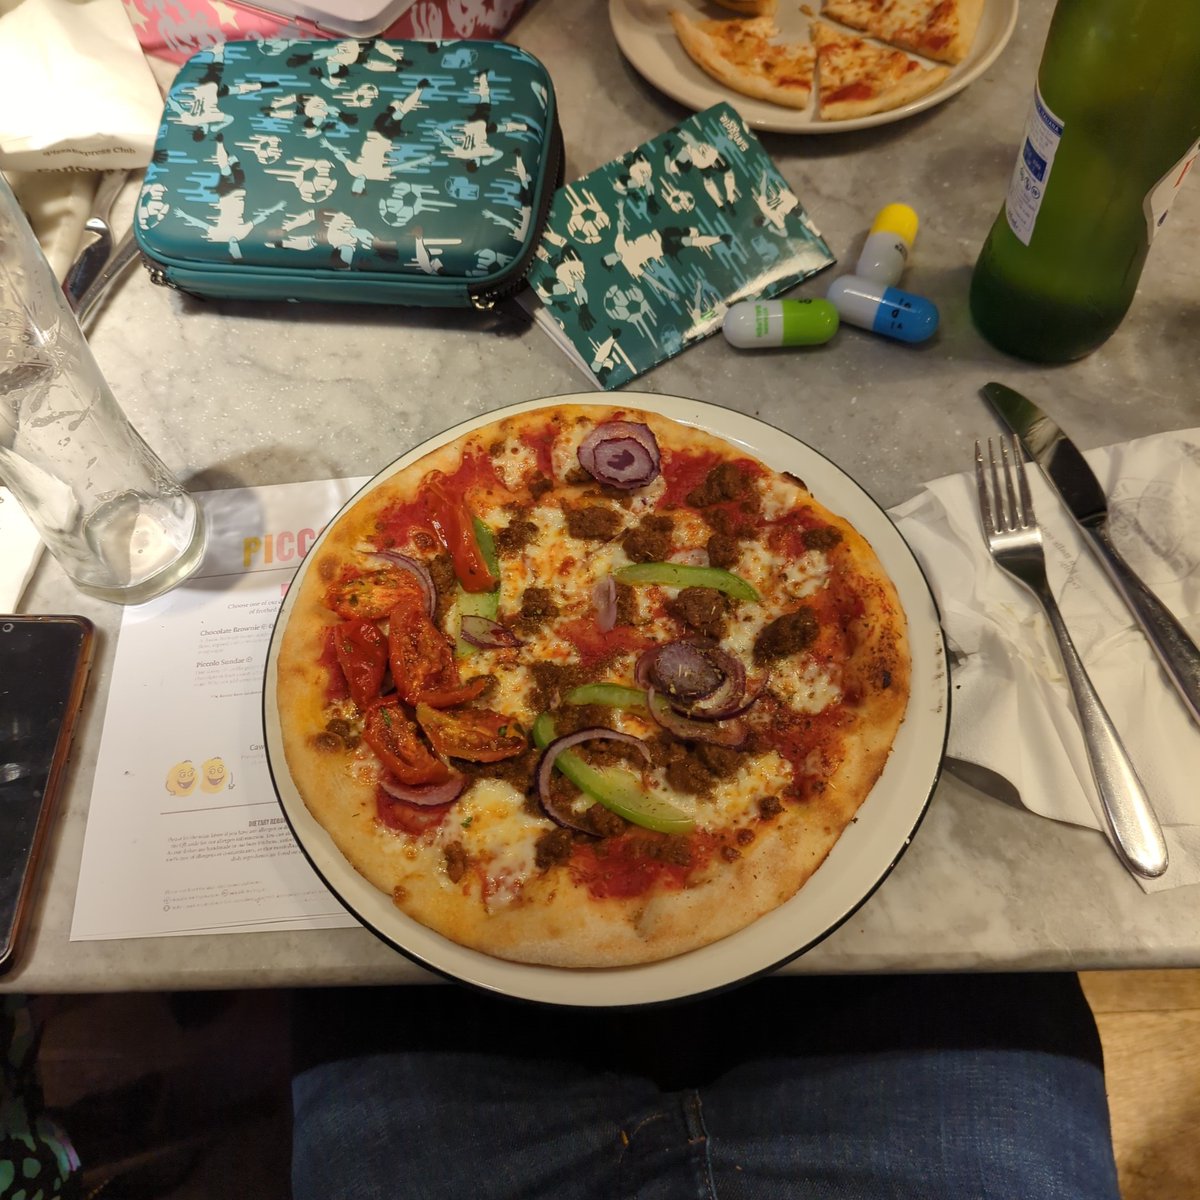 @PizzaExpress are you being serious with reducing the size of the pizzas to this??? Come on...